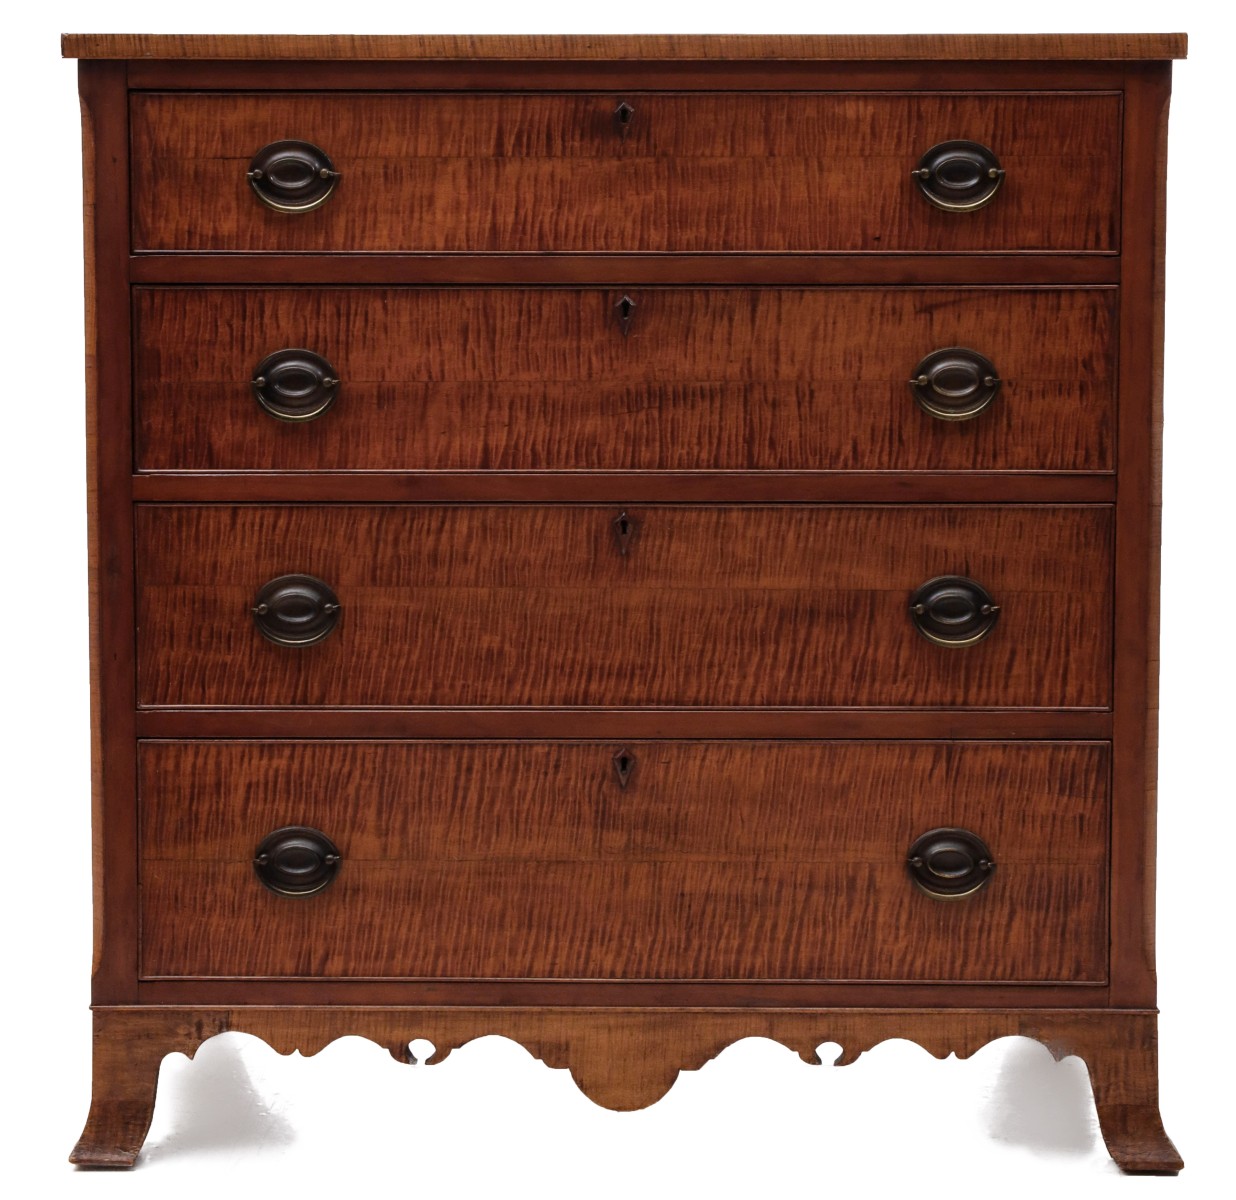 A 19TH C. AMERICAN TIGER MAPLE AND CHERRY CHEST